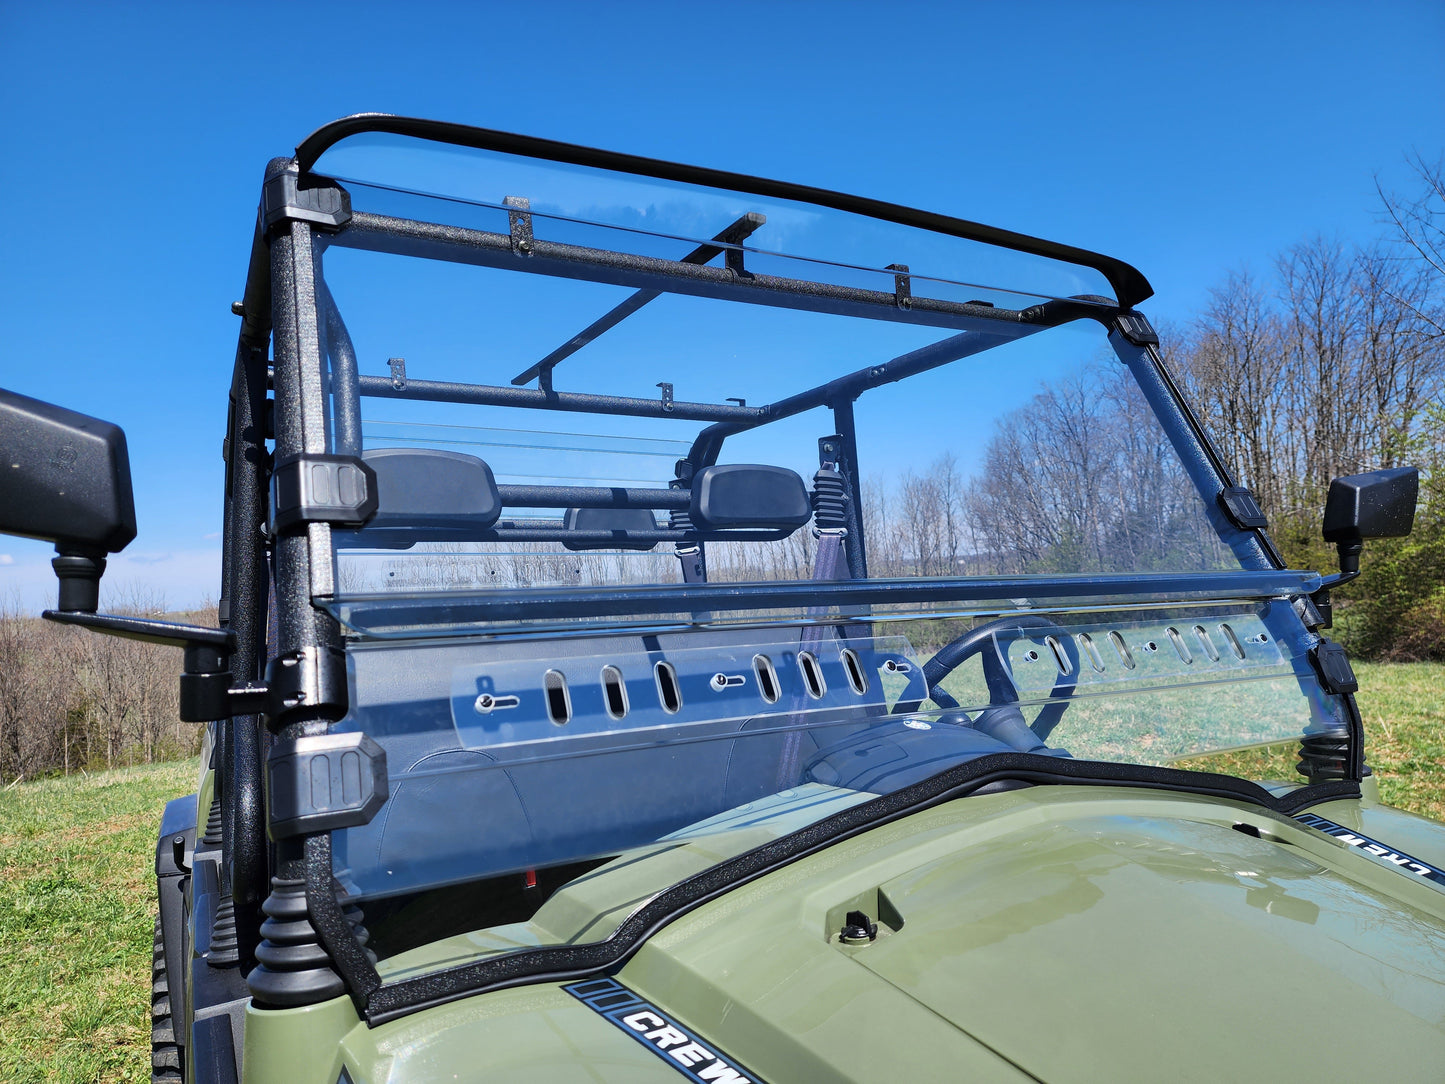 HiSun Sector 750 Crew - 2 Pc Windshield with Vent, Clamp, and Hard Coat Options - 3 Star UTV